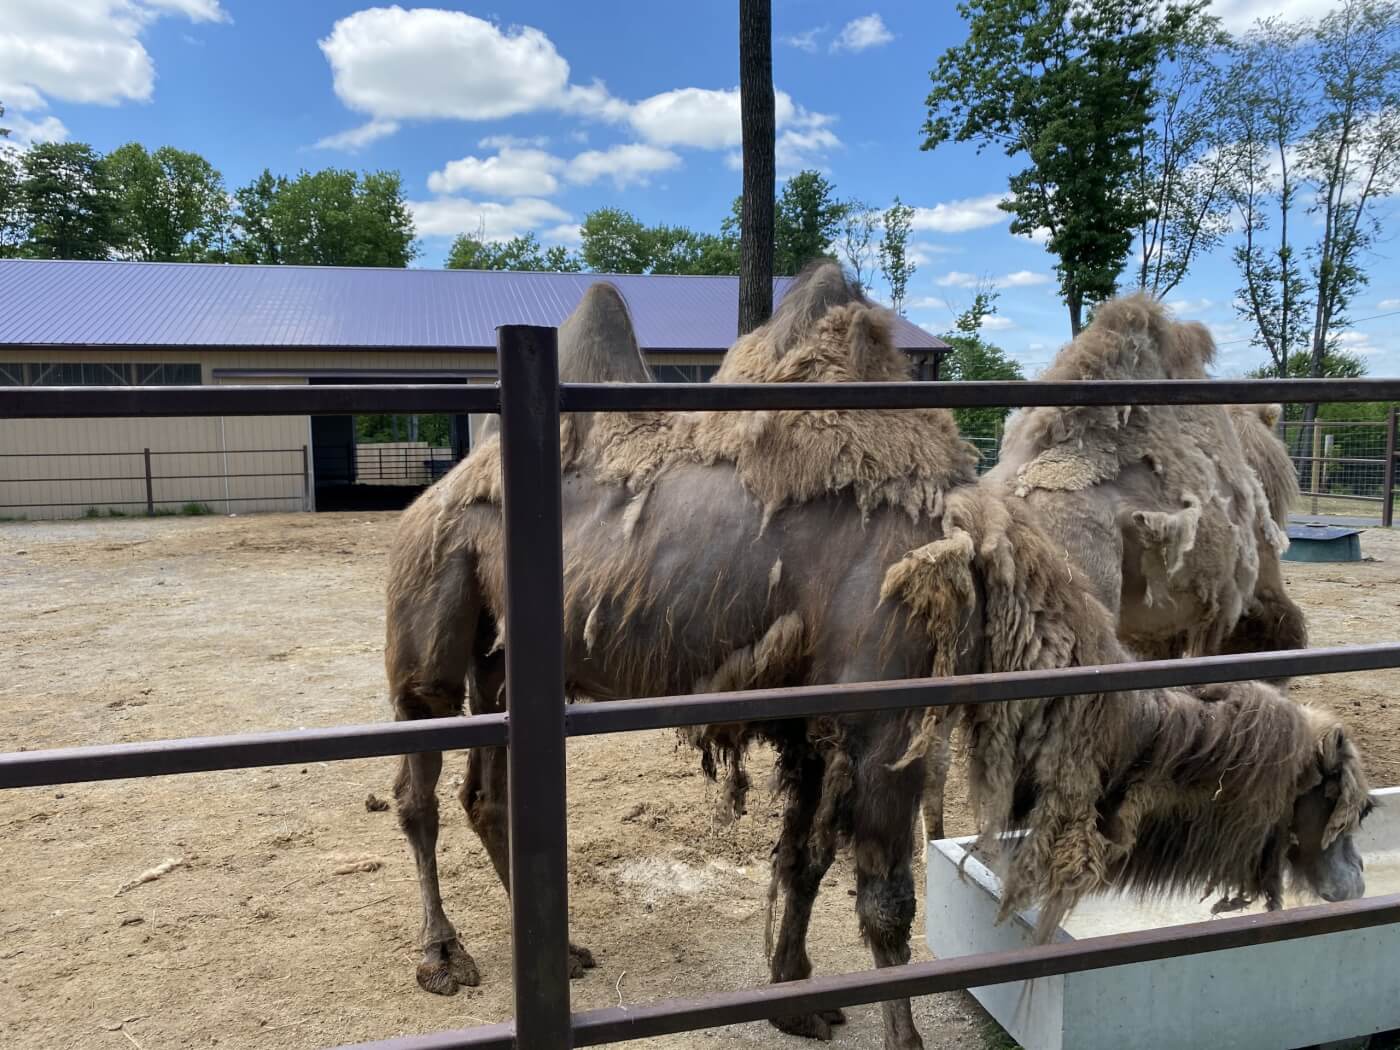 Camels with missing patches of fur stand in their barren enclosure